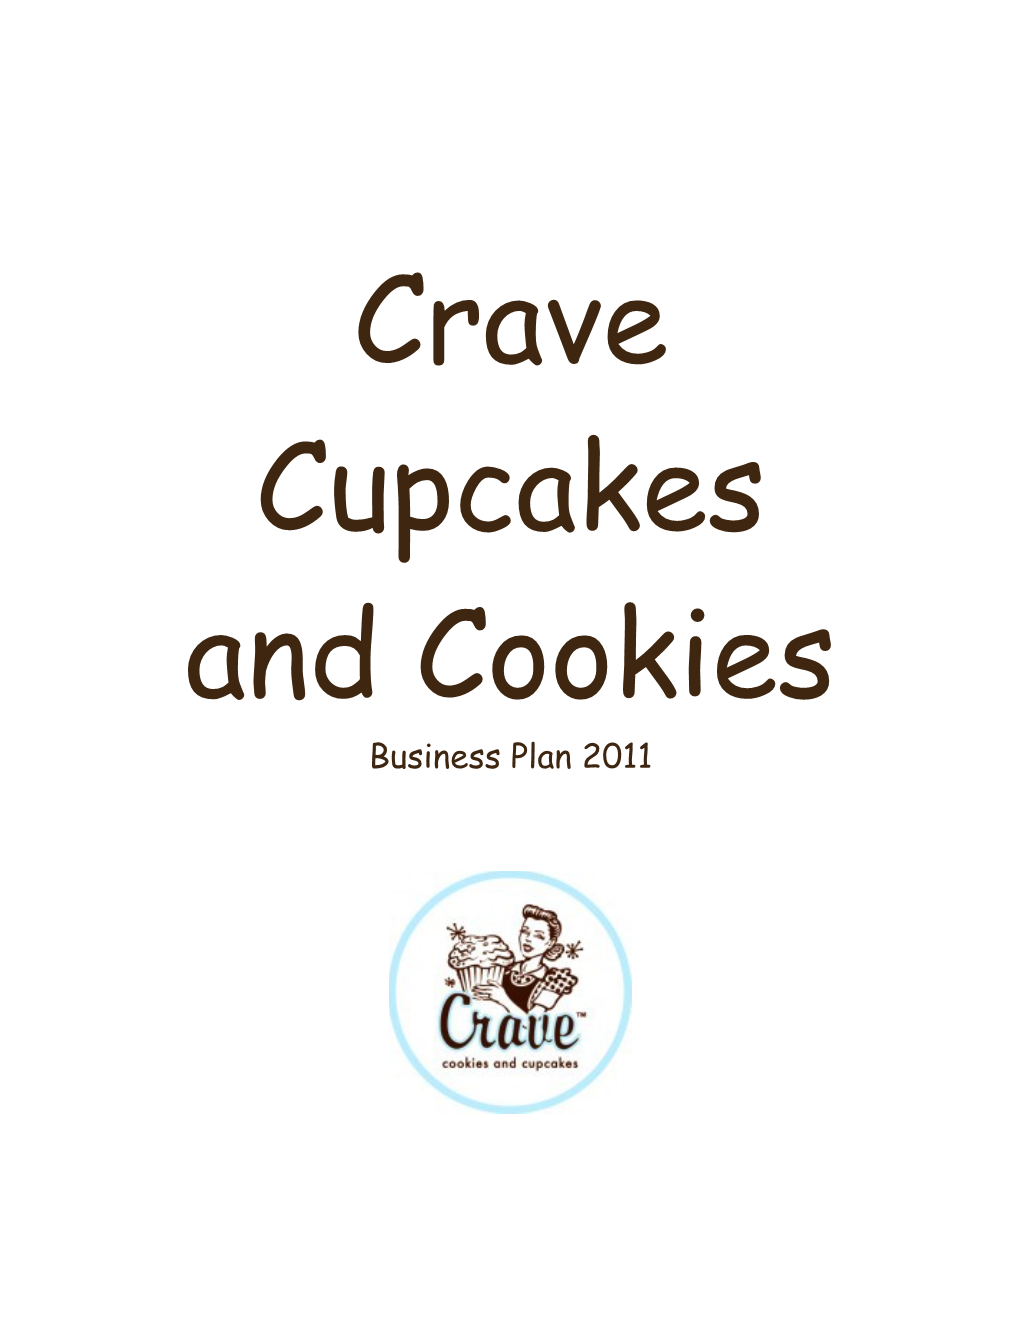 Crave Cupcakes and Cookies